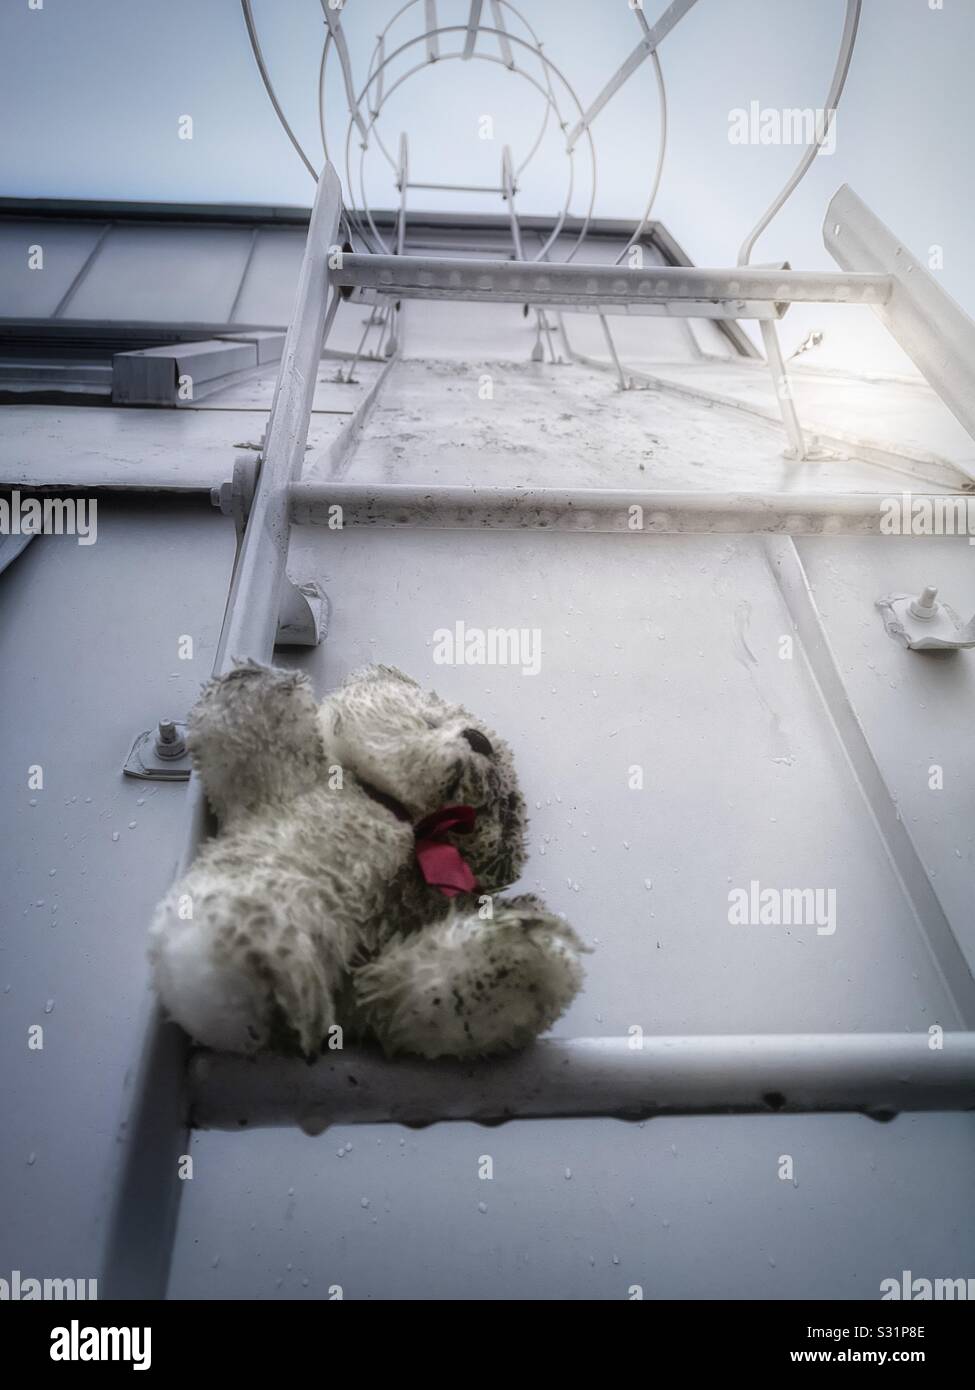 Dirty teddy bear on rung of wet roof escape ladder, Sweden Stock Photo